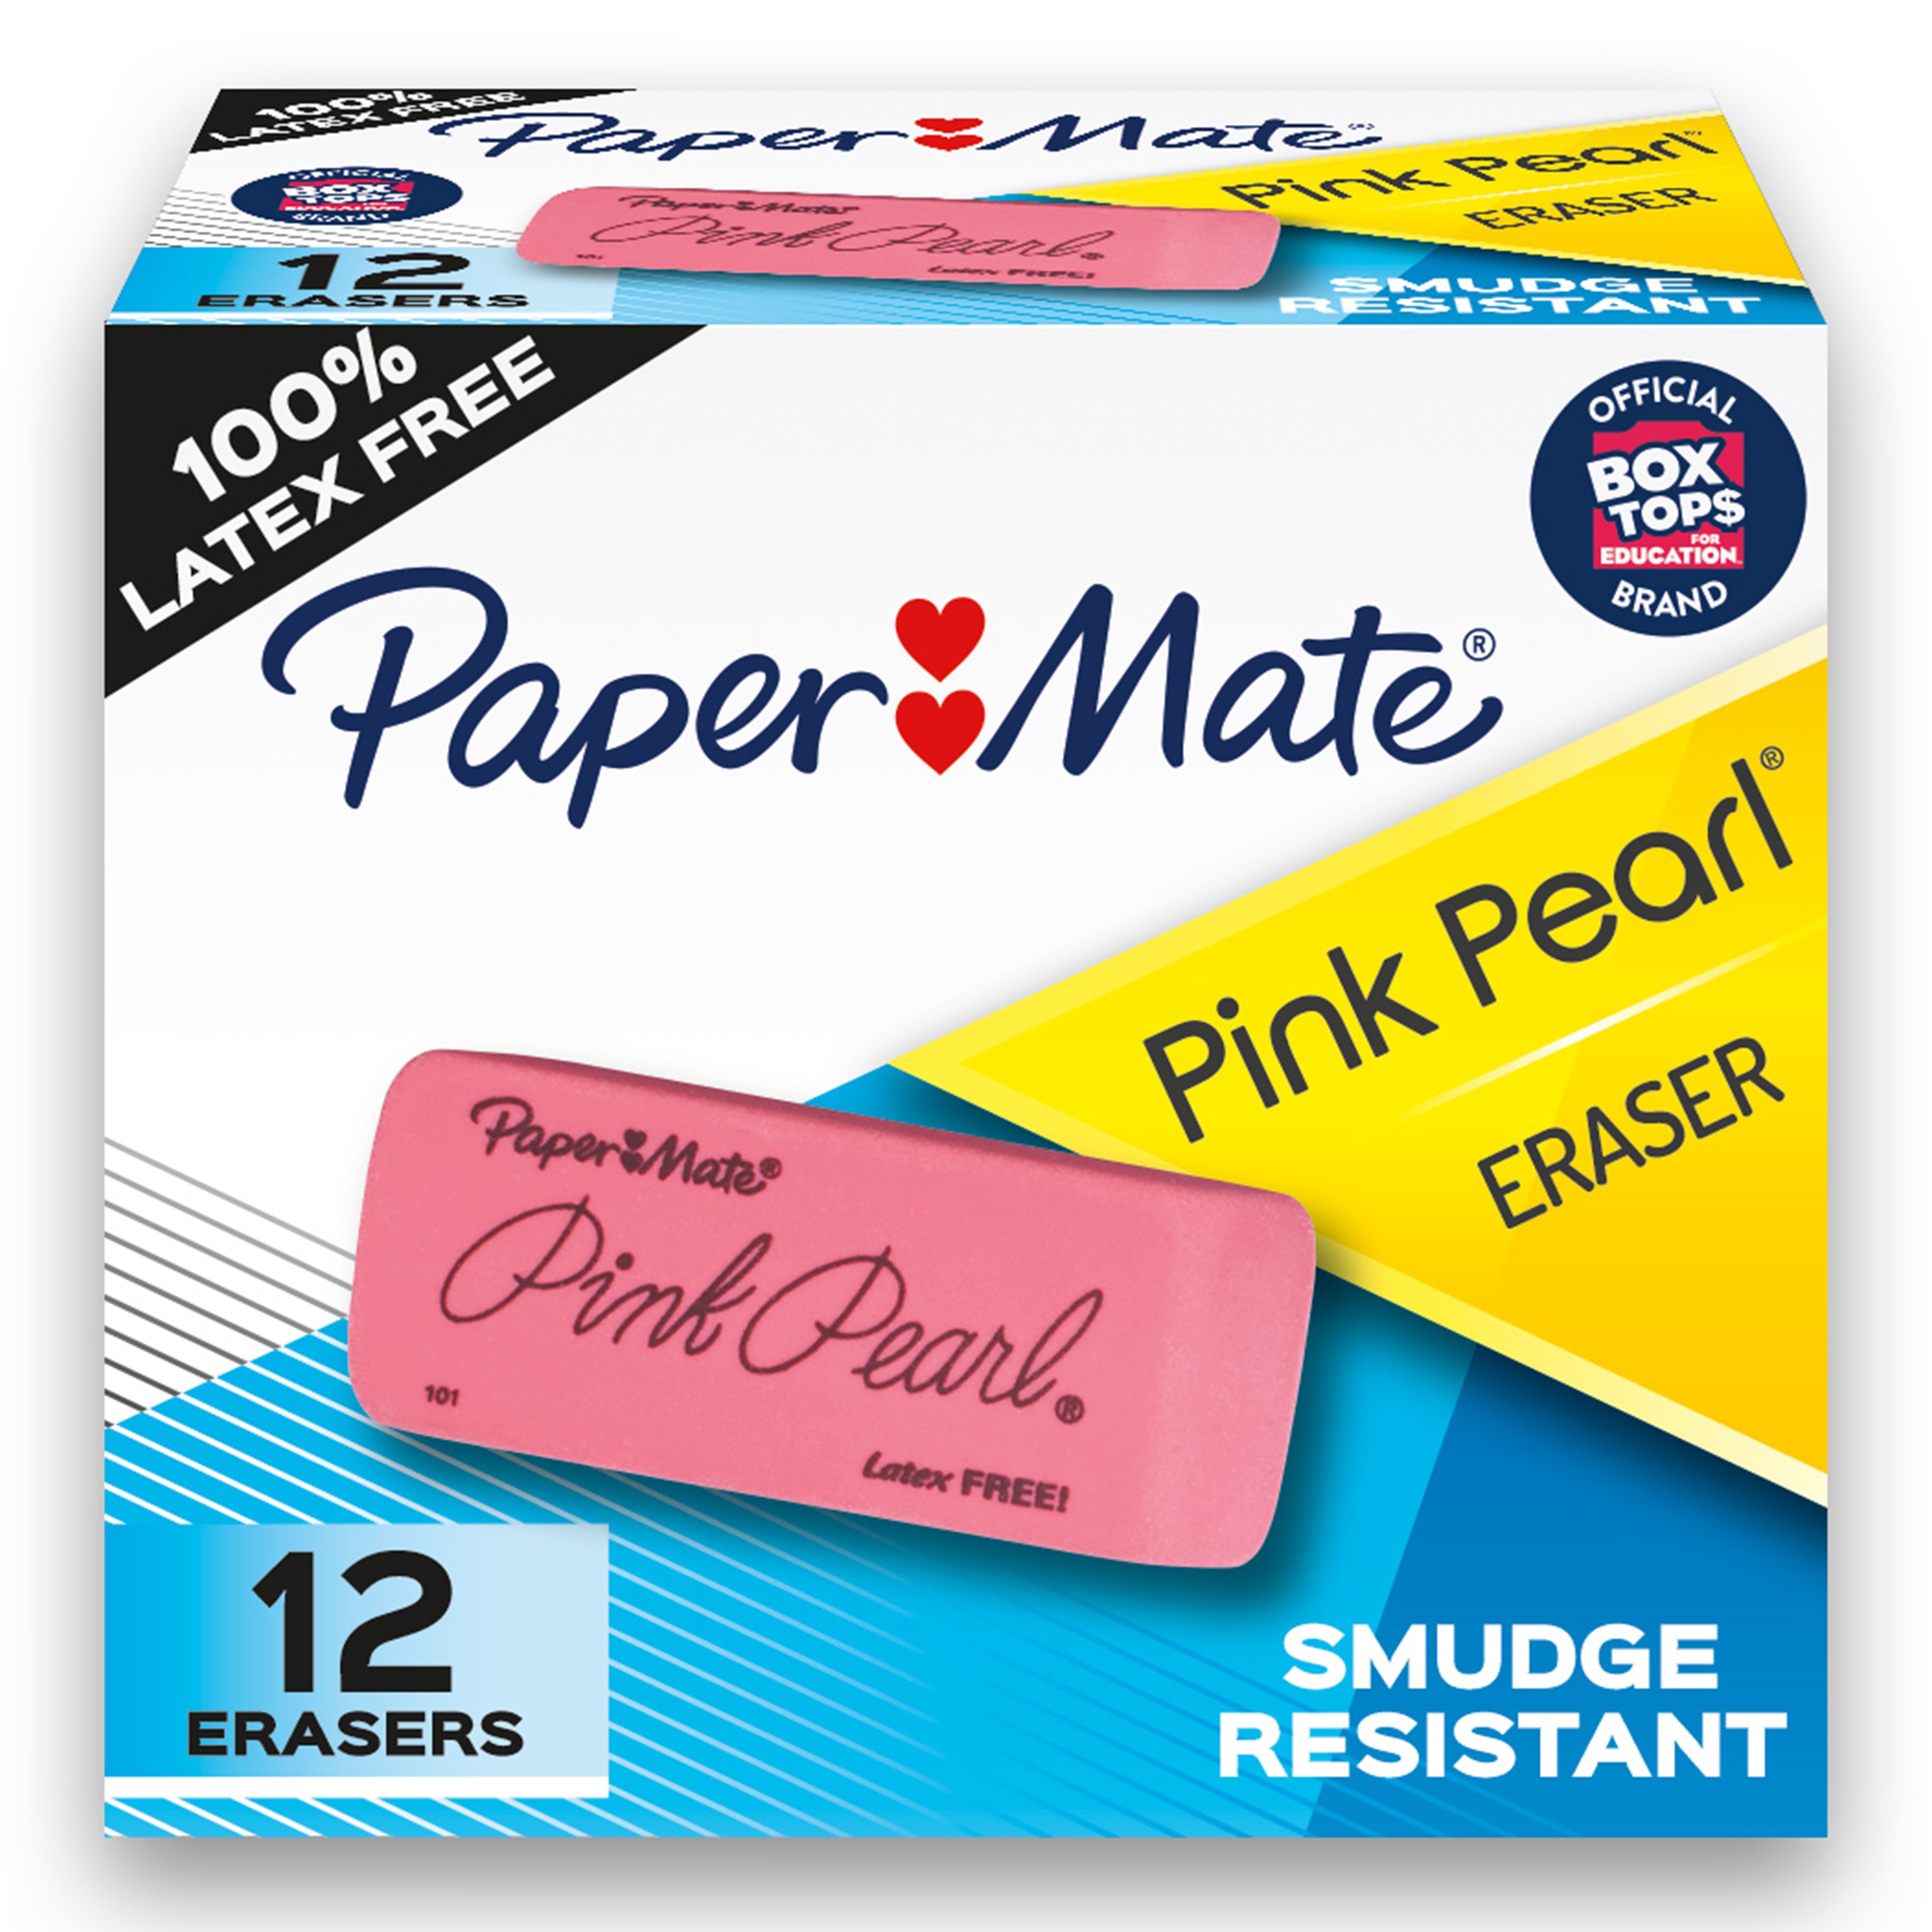 Paper Mate Pink Pearl Erasers, Large, 12 Count - image 1 of 8